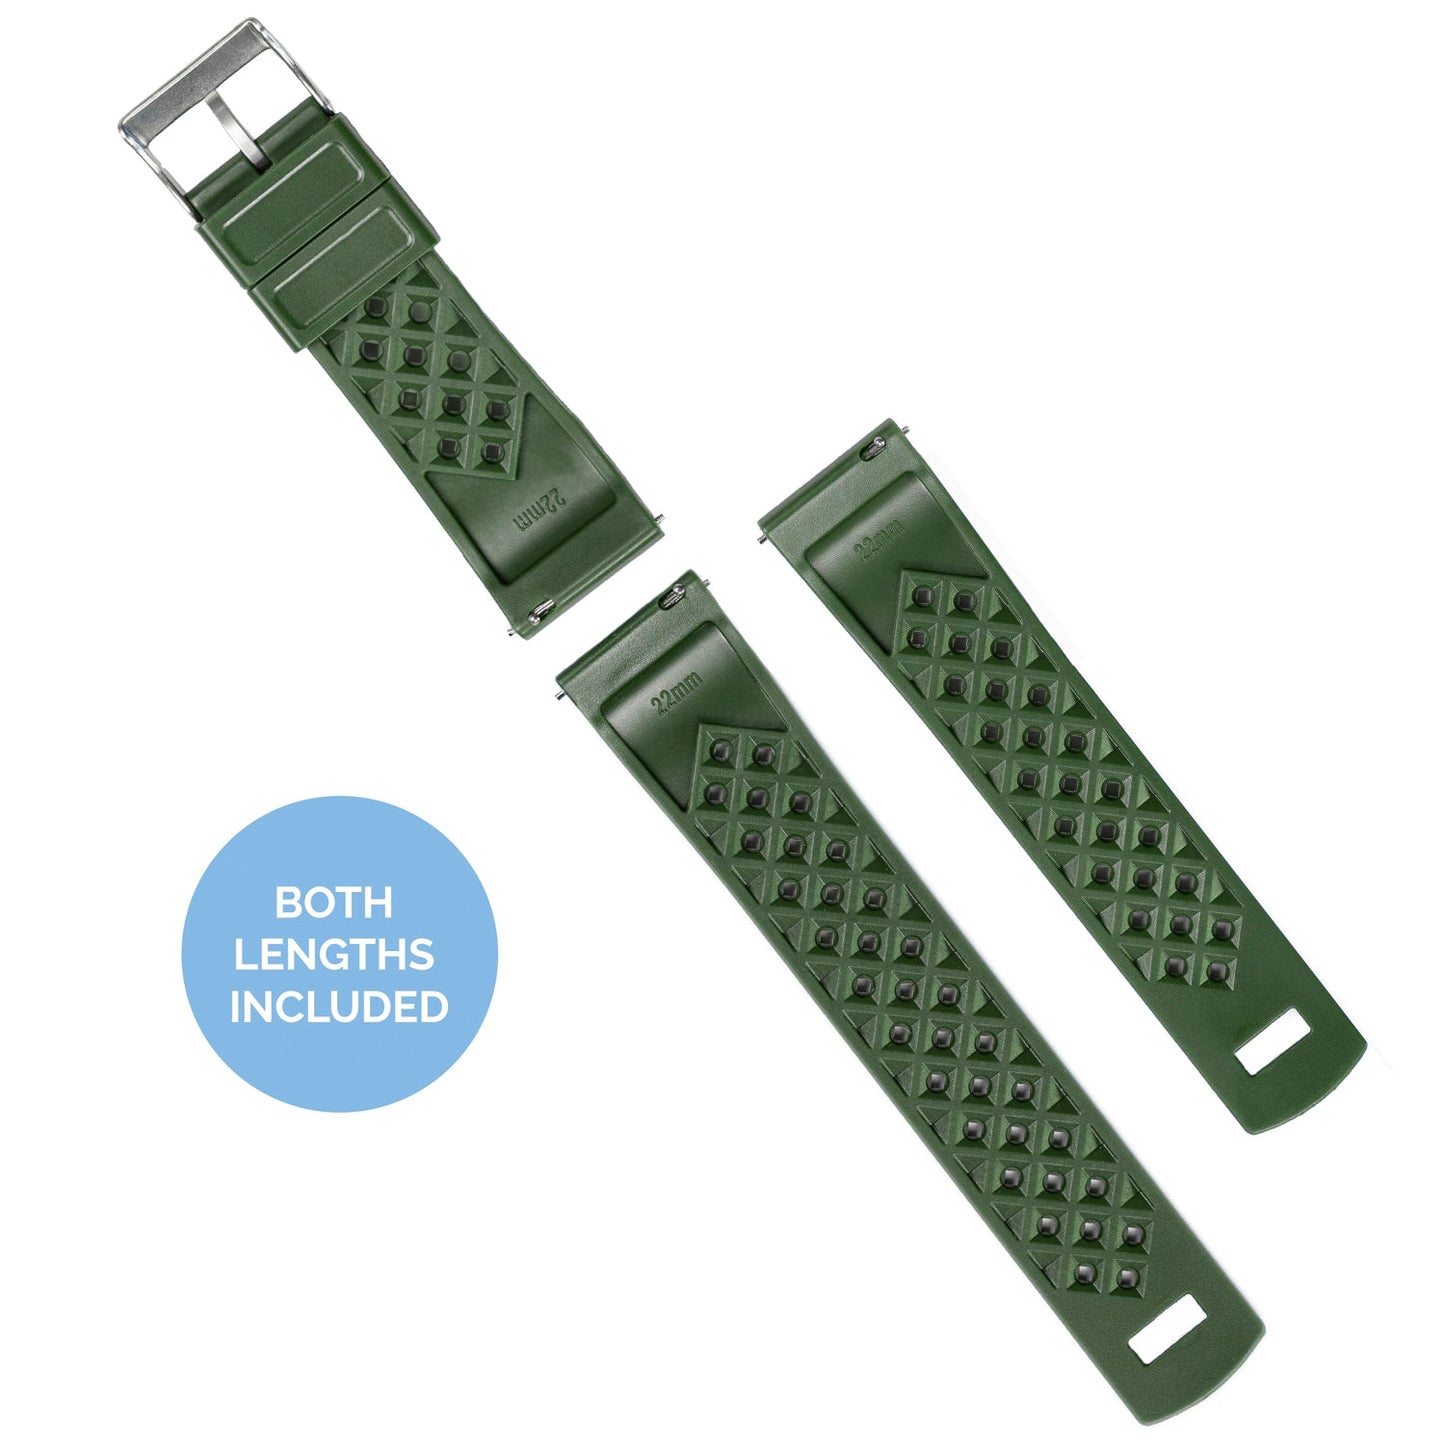 Samsung Galaxy Watch Active | Tropical-Style 2.0 | Army Green by Barton Watch Bands